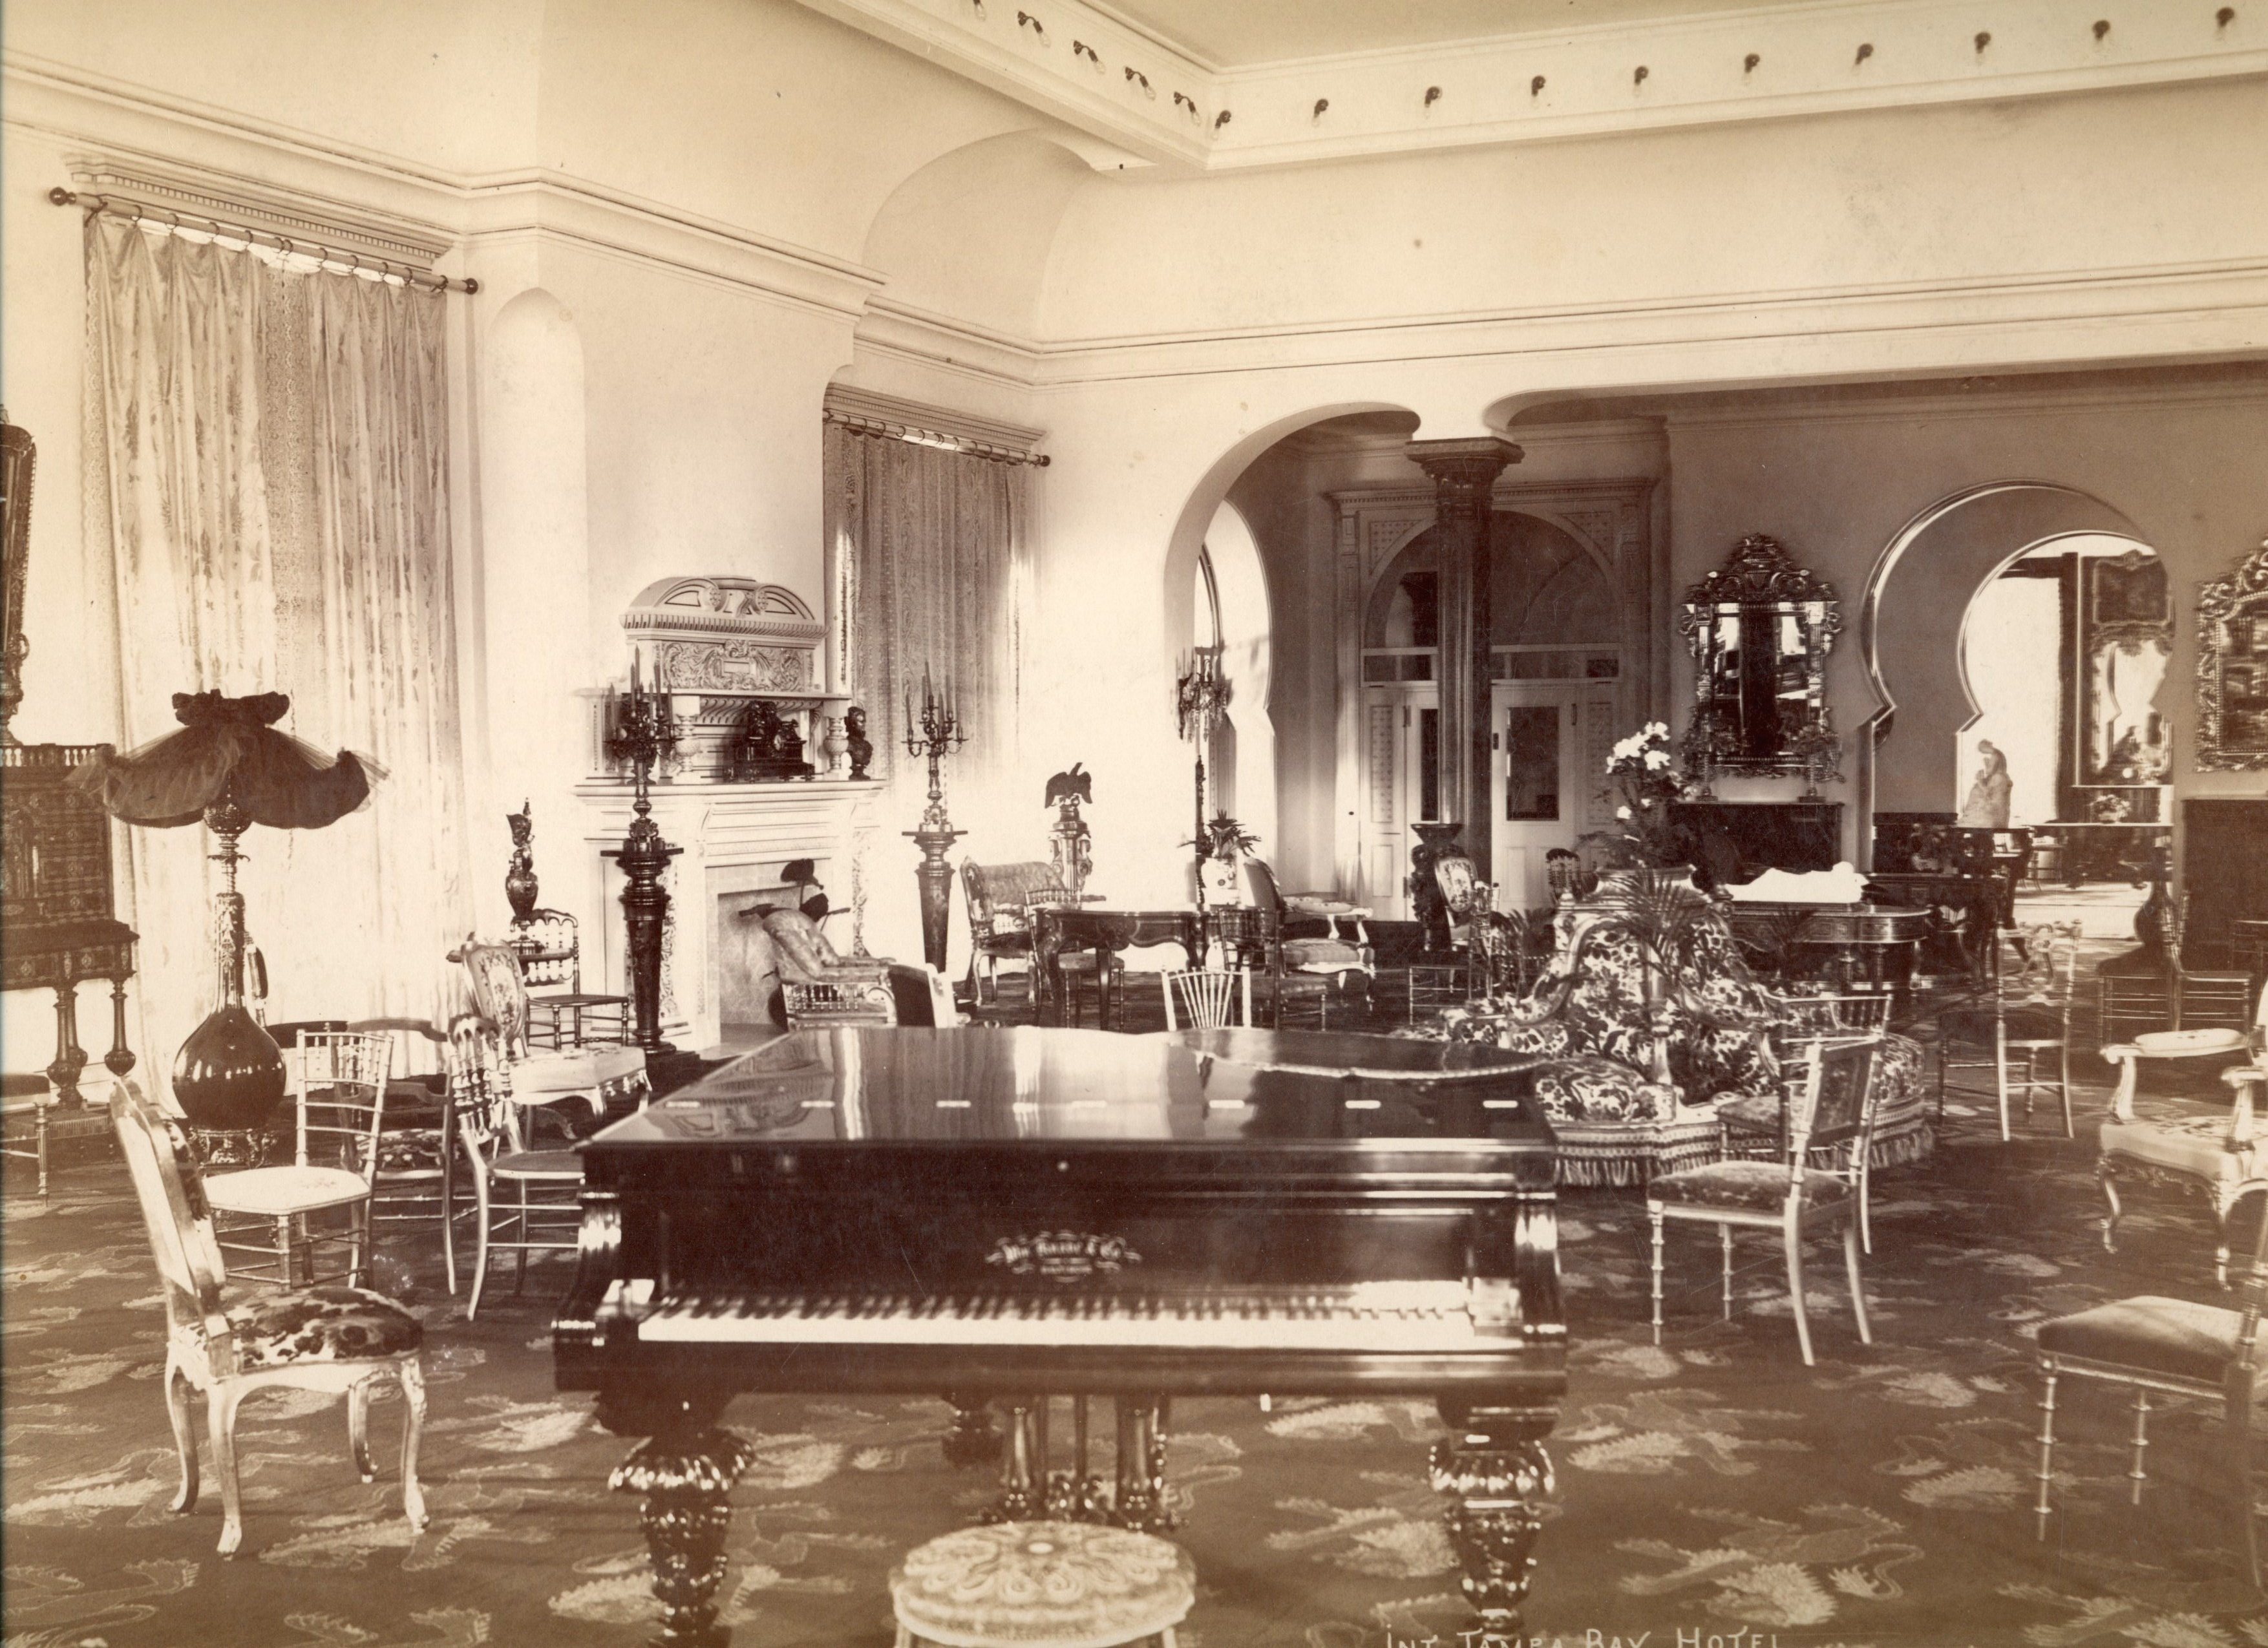 interior room, fancy chairs and sculptures scattered throughout, grand piano in foreground